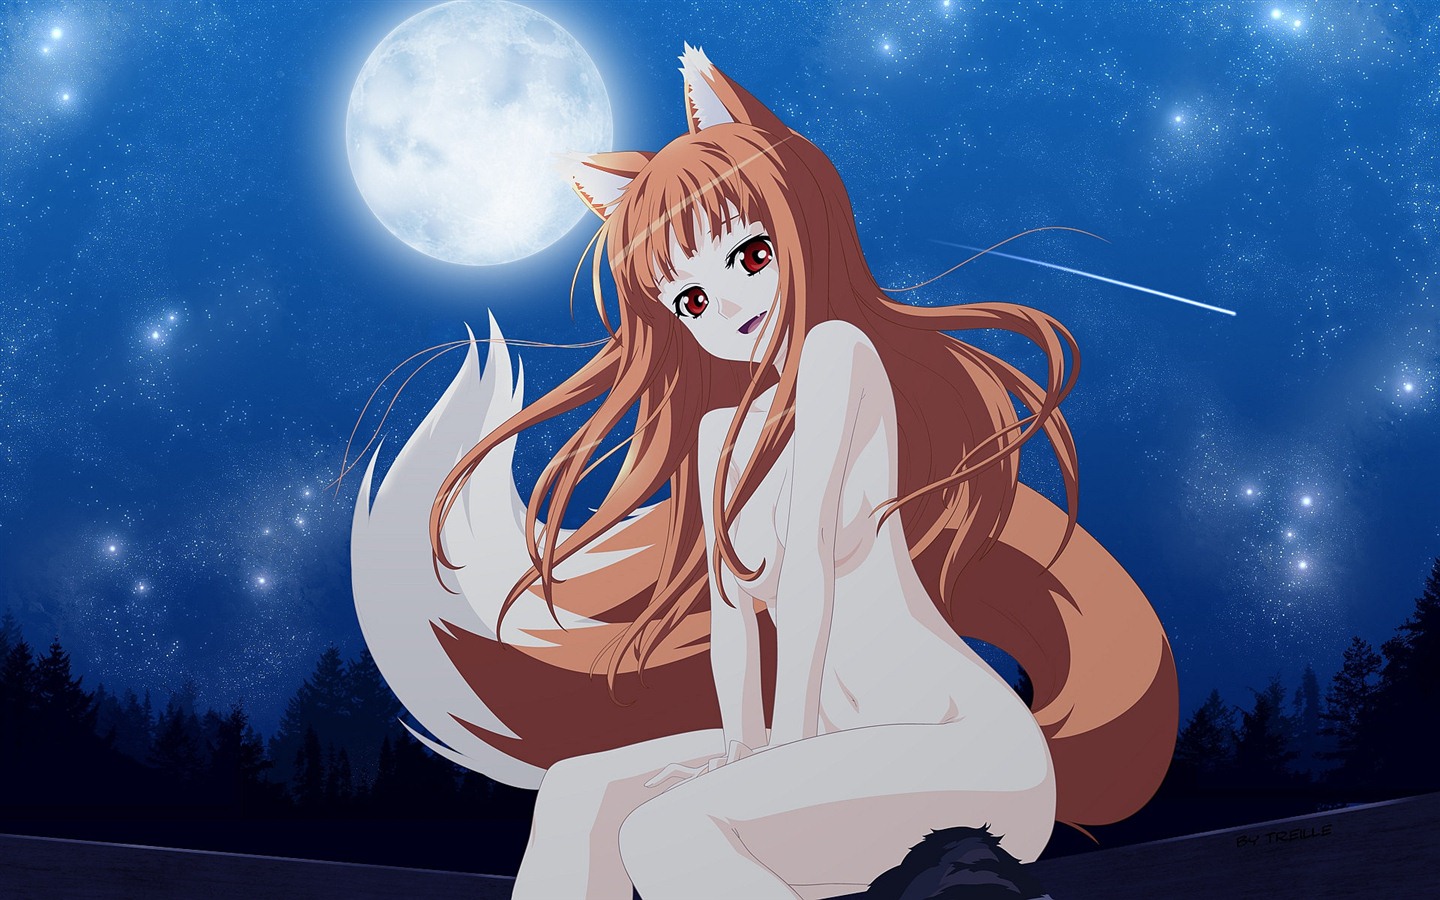 Spice and Wolf HD wallpapers #7 - 1440x900